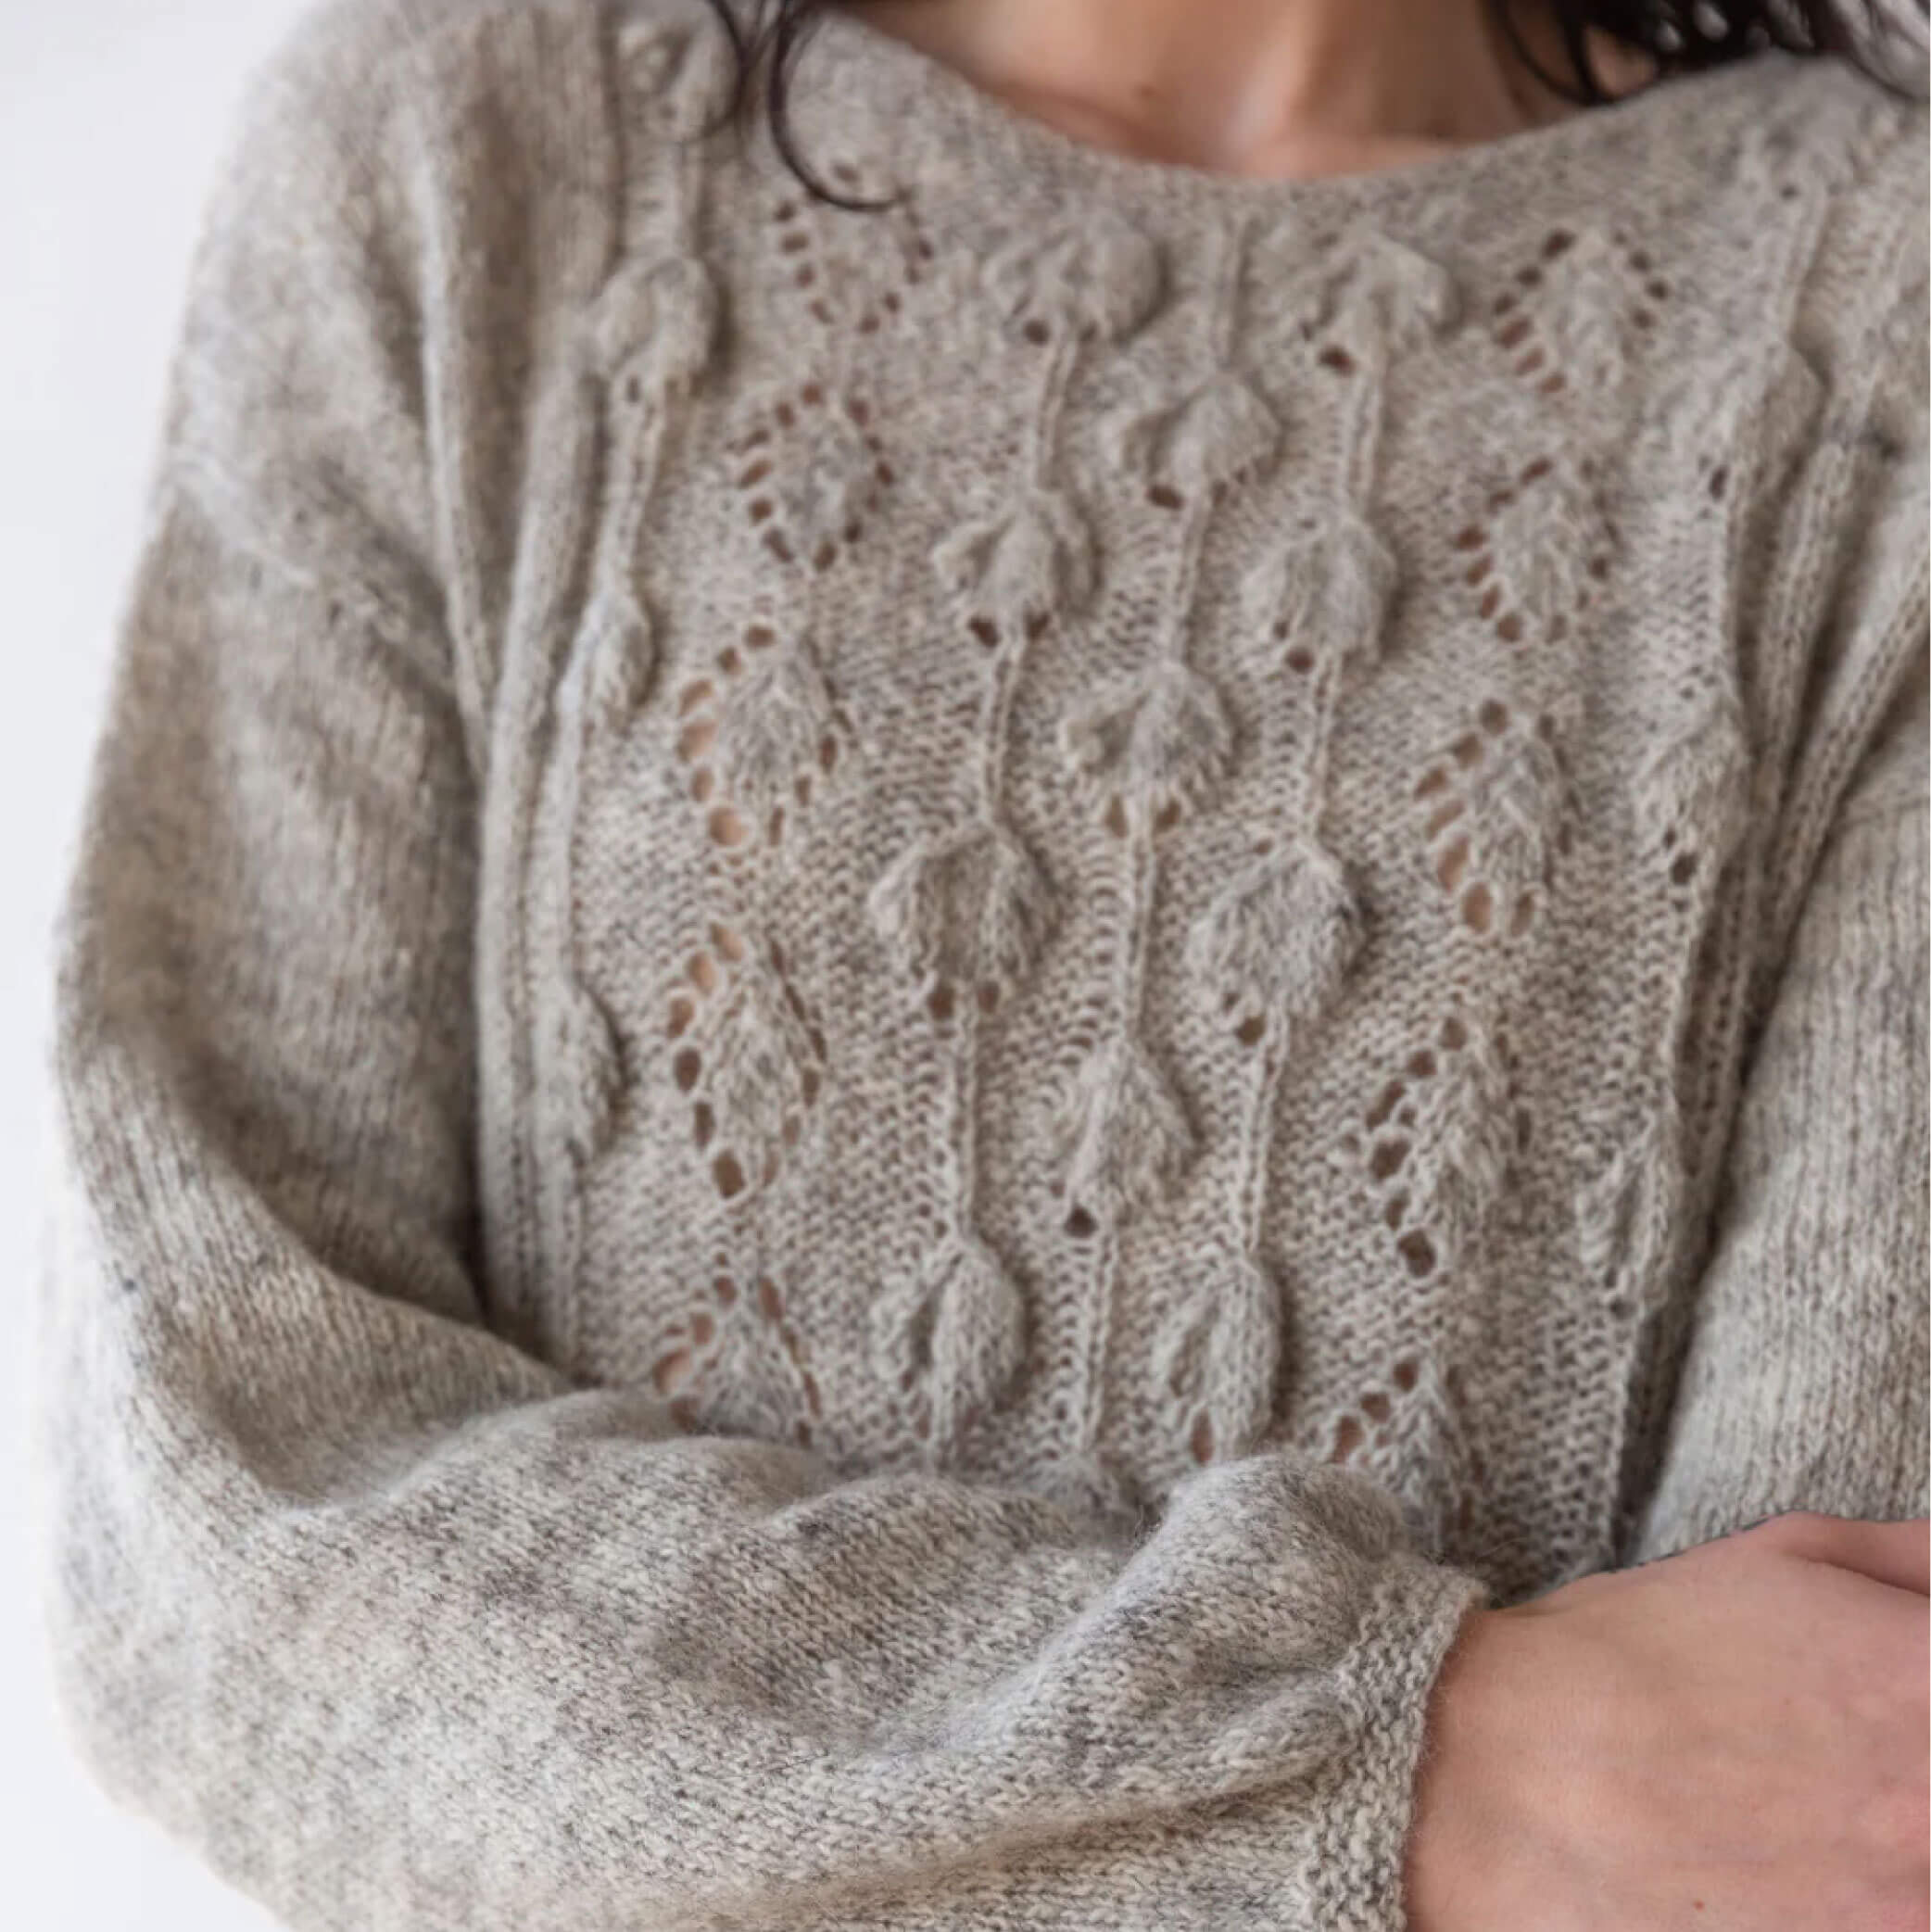 SWEETFERN ニットワンピース レシピ【Owlet】【Quince&Co】【seeknit】【編み図】【パターン】【ニットワンピース】☆レシピ｜syugei｜03